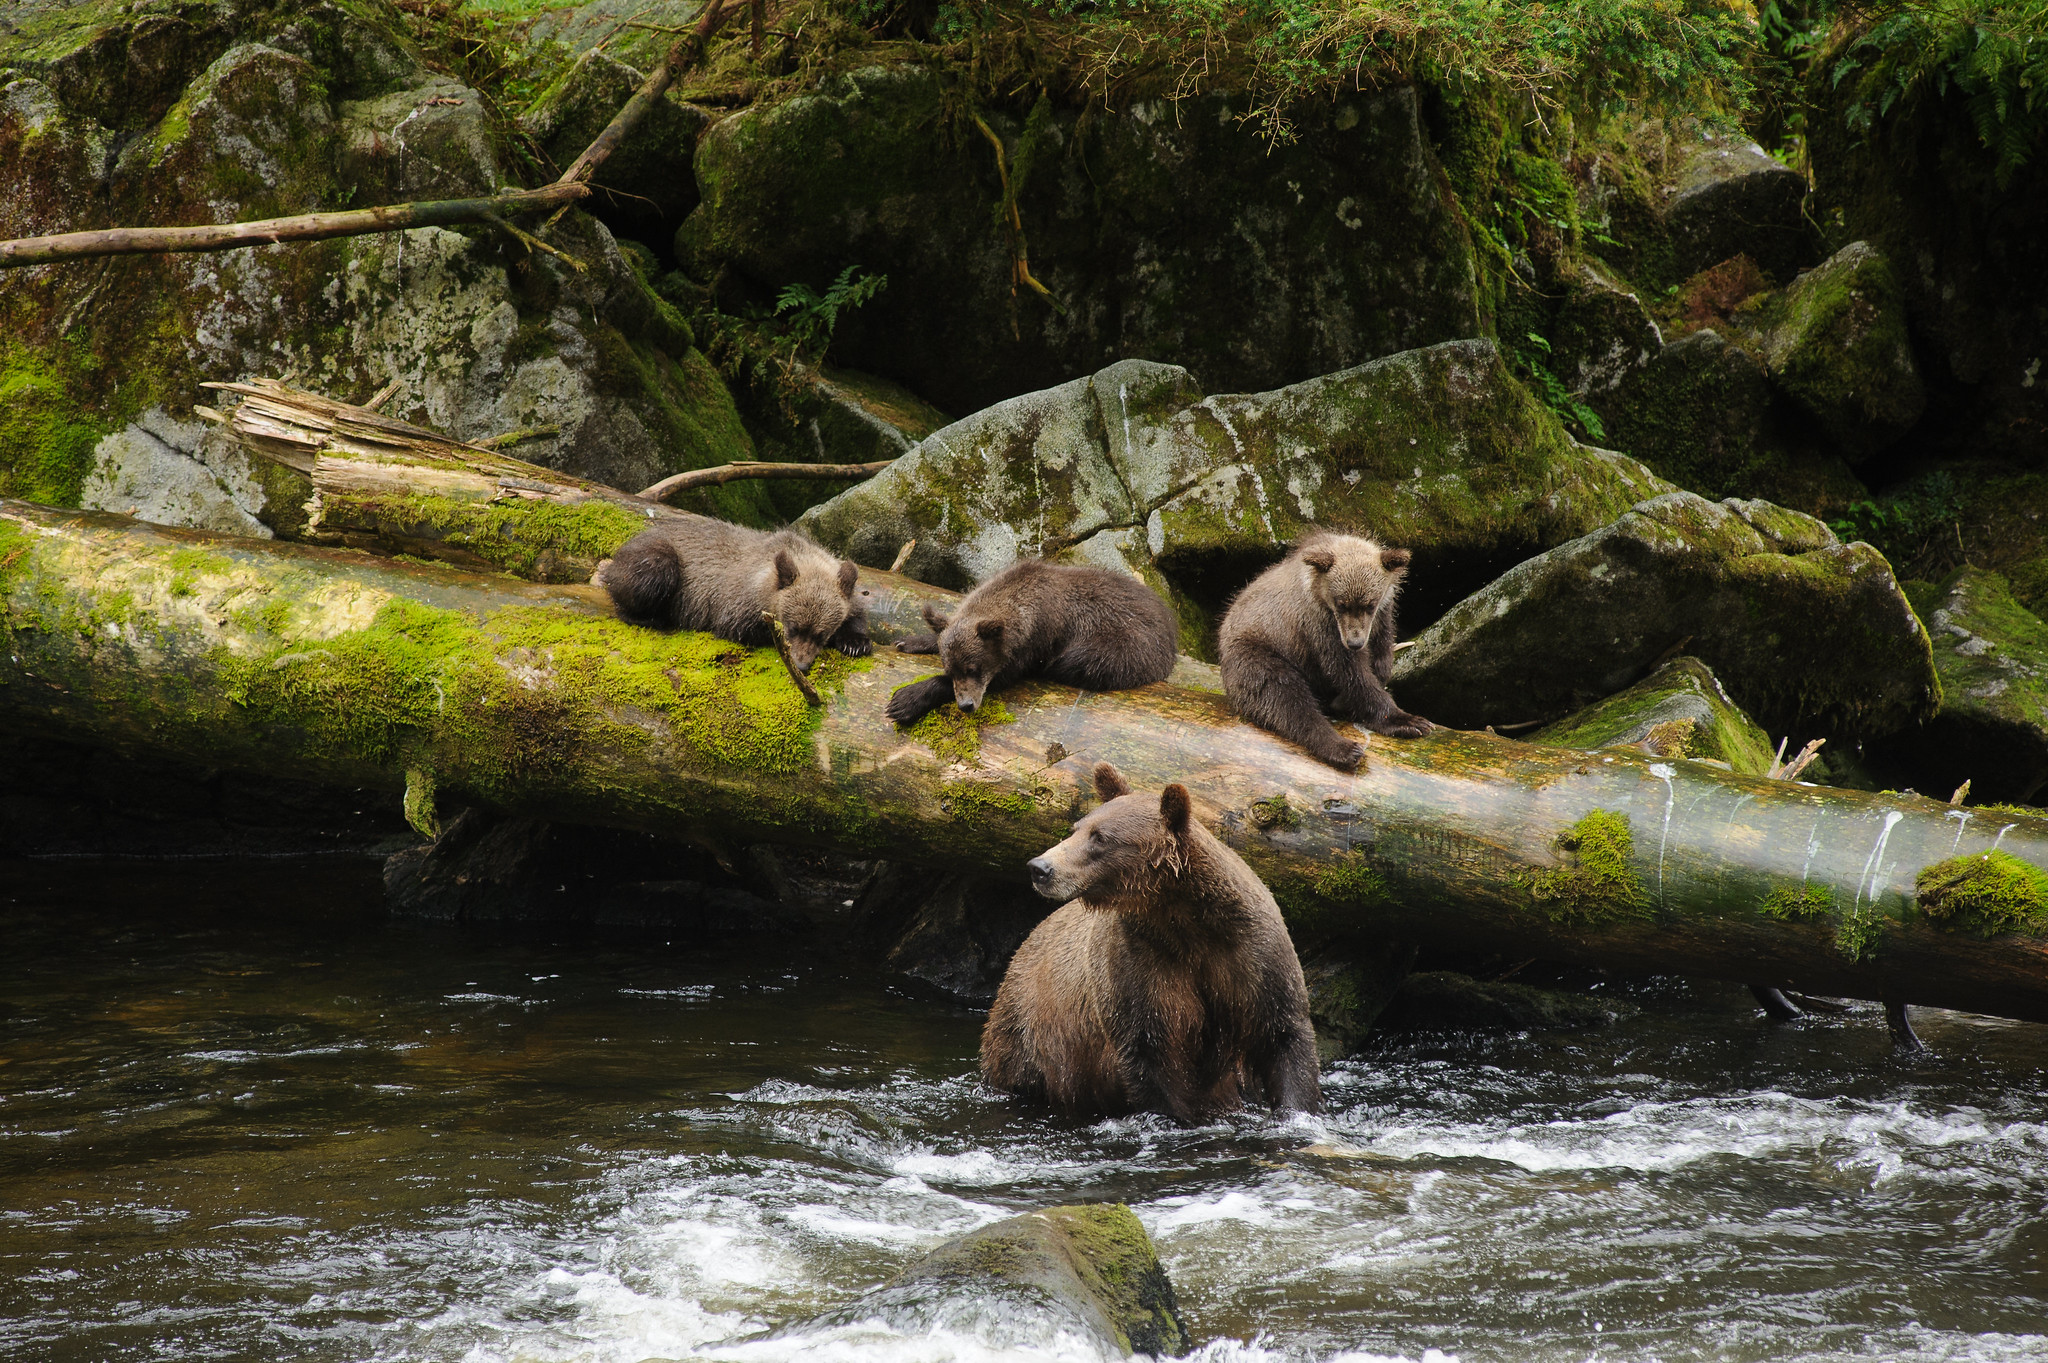 A mother bear in the water of a stream while three cubs sit on a fallen log above her, a large trees and green moss in the background - Tongass National Forest - Forest Service photo by Mark Meyer